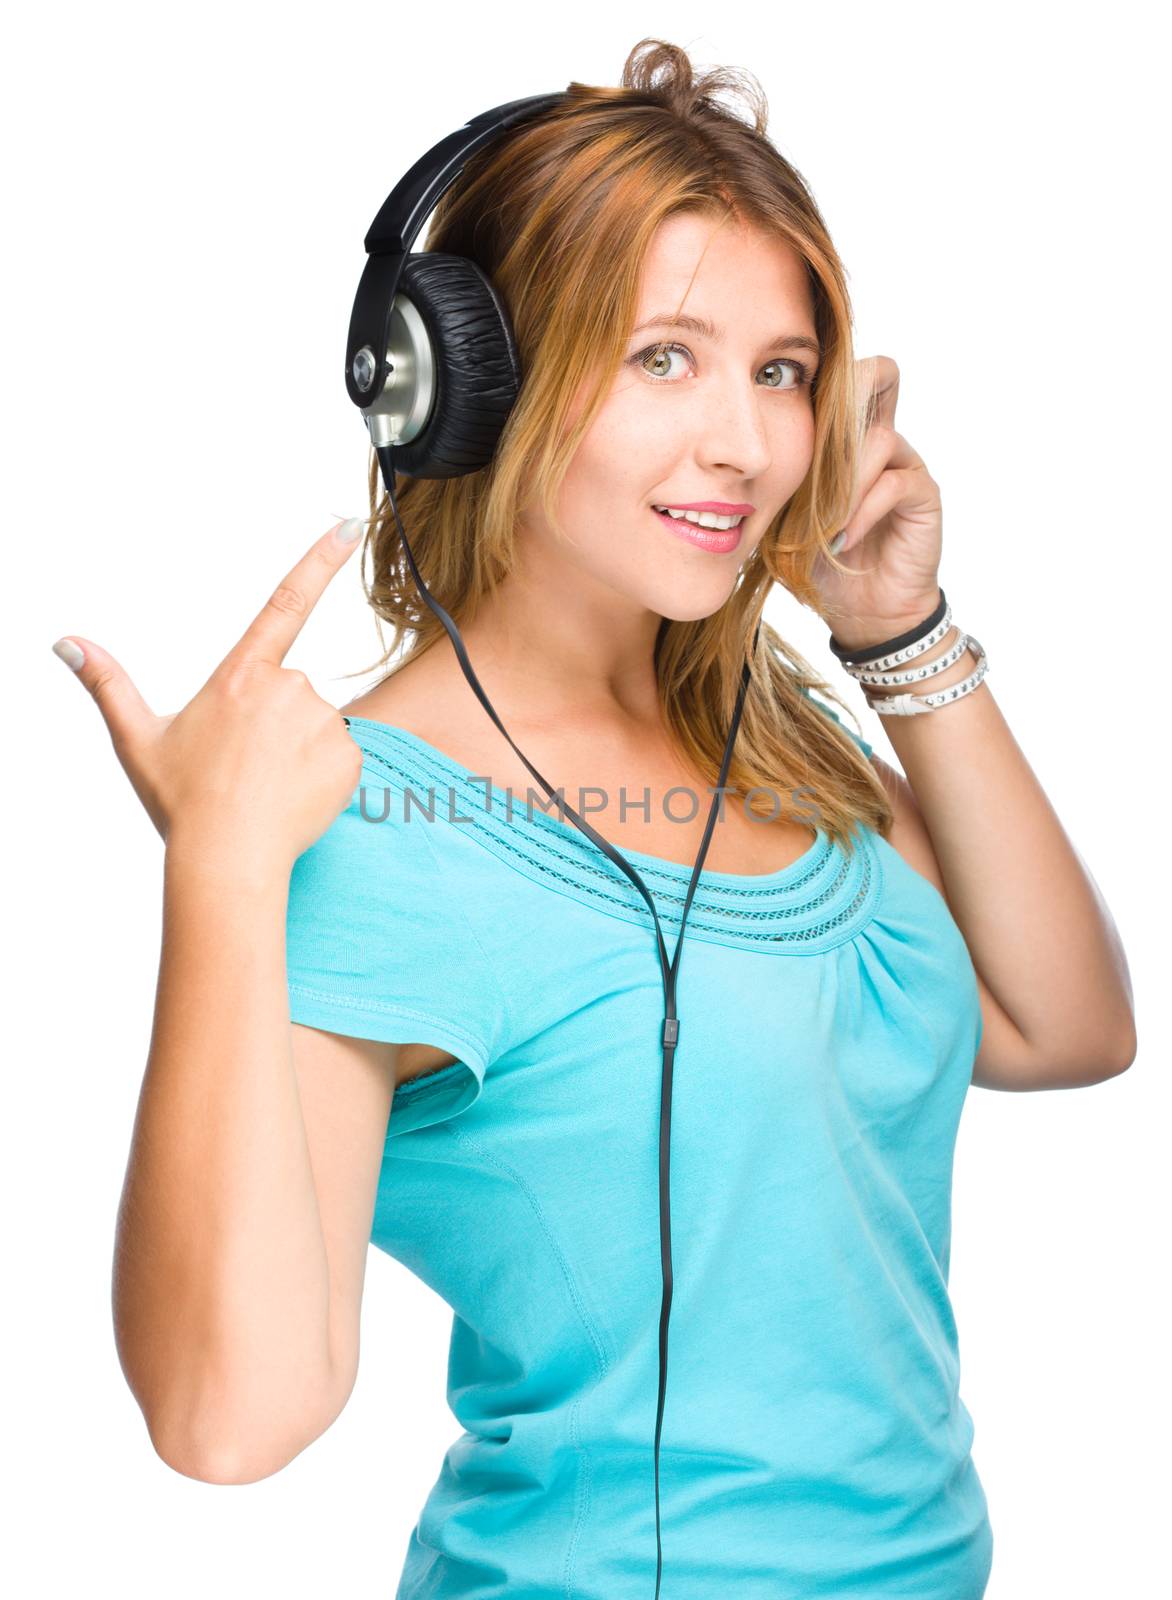 music and technology concept - young woman listening to music and show on her headphones, isolated on white background
